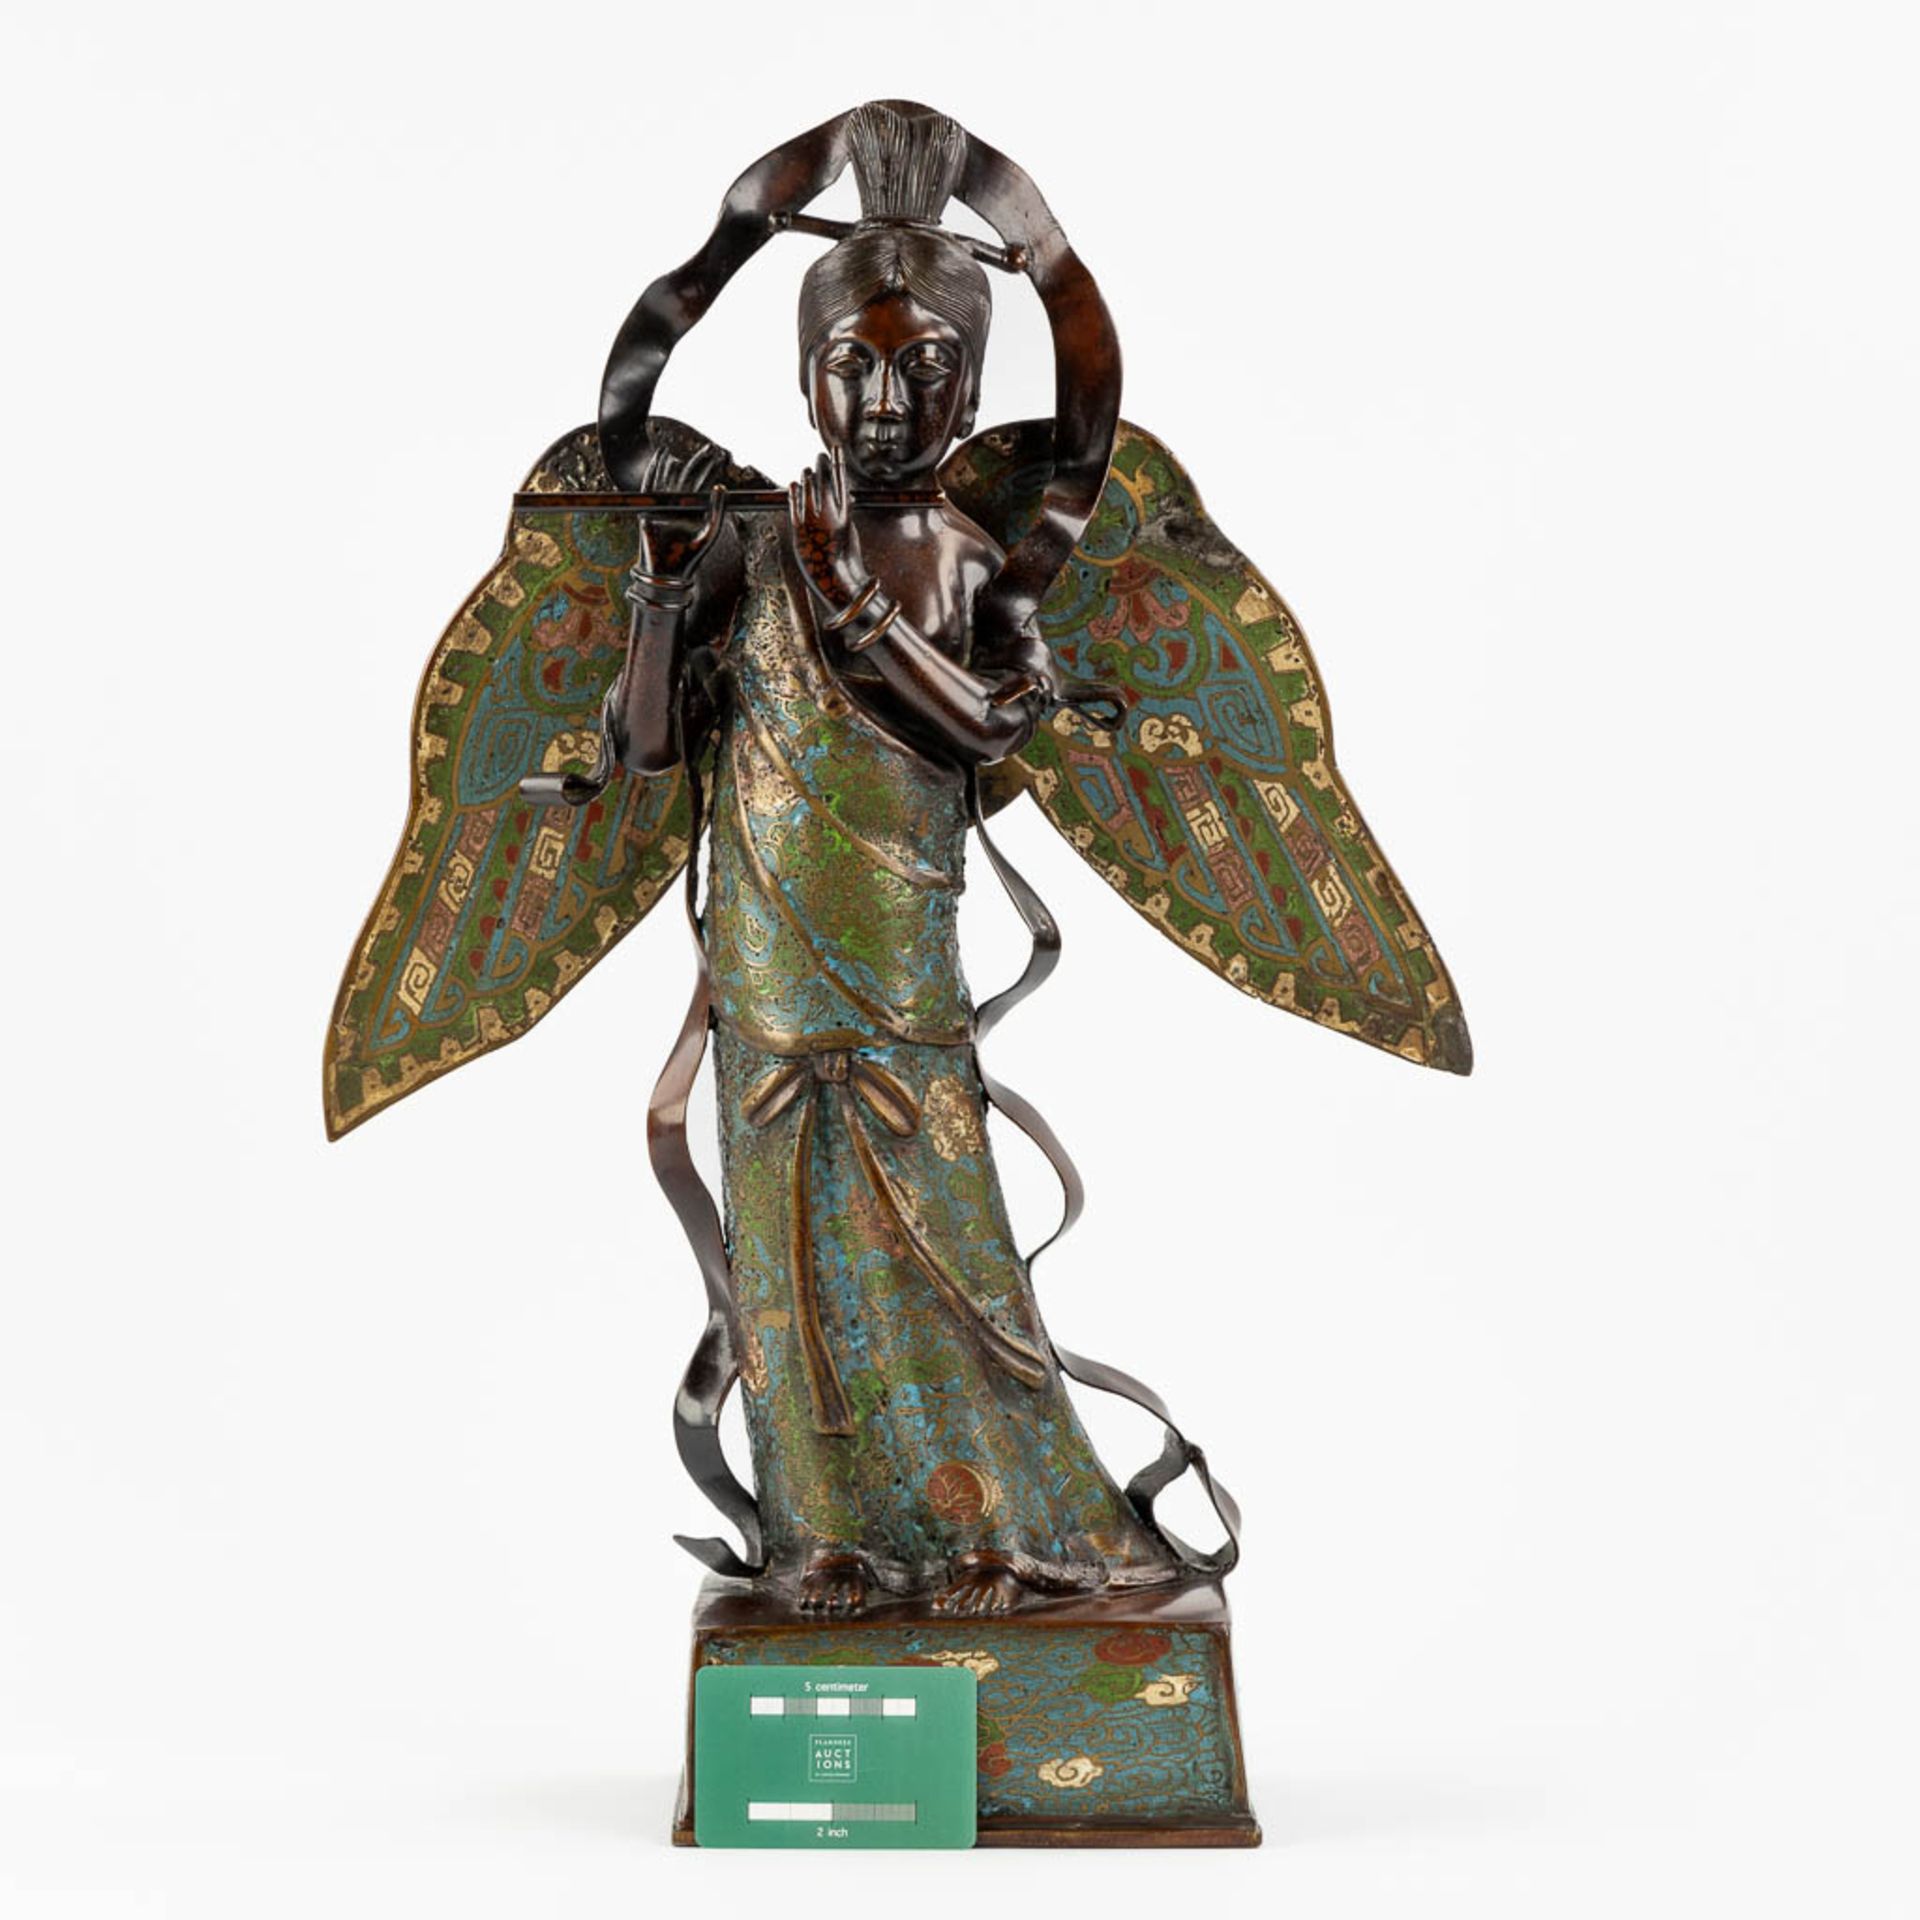 An Oriental figurine of an Angel with a flute, Champslevé bronze. (L:15 x W:35 x H:53 cm) - Image 2 of 14